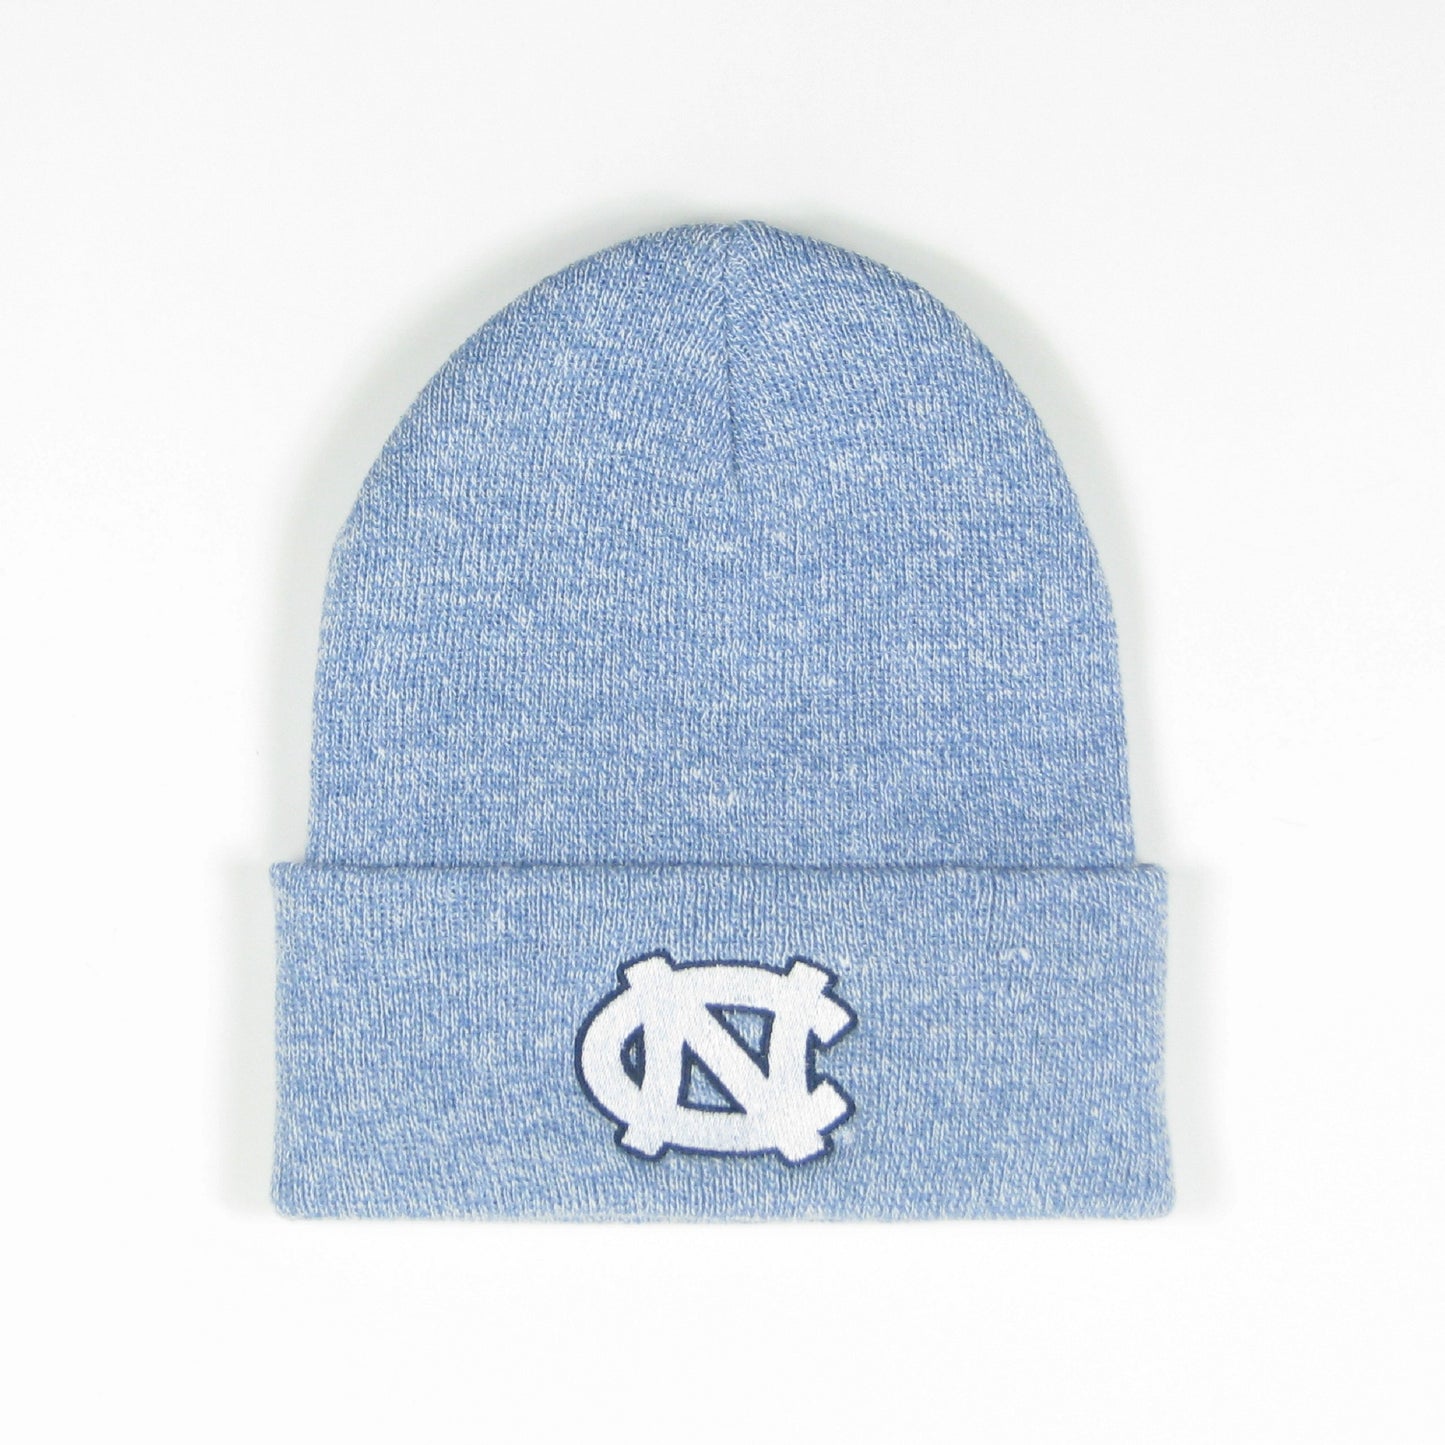 Carolina Blue Cuffed Unisex Beanie with UNC Logo in White Embroidered 